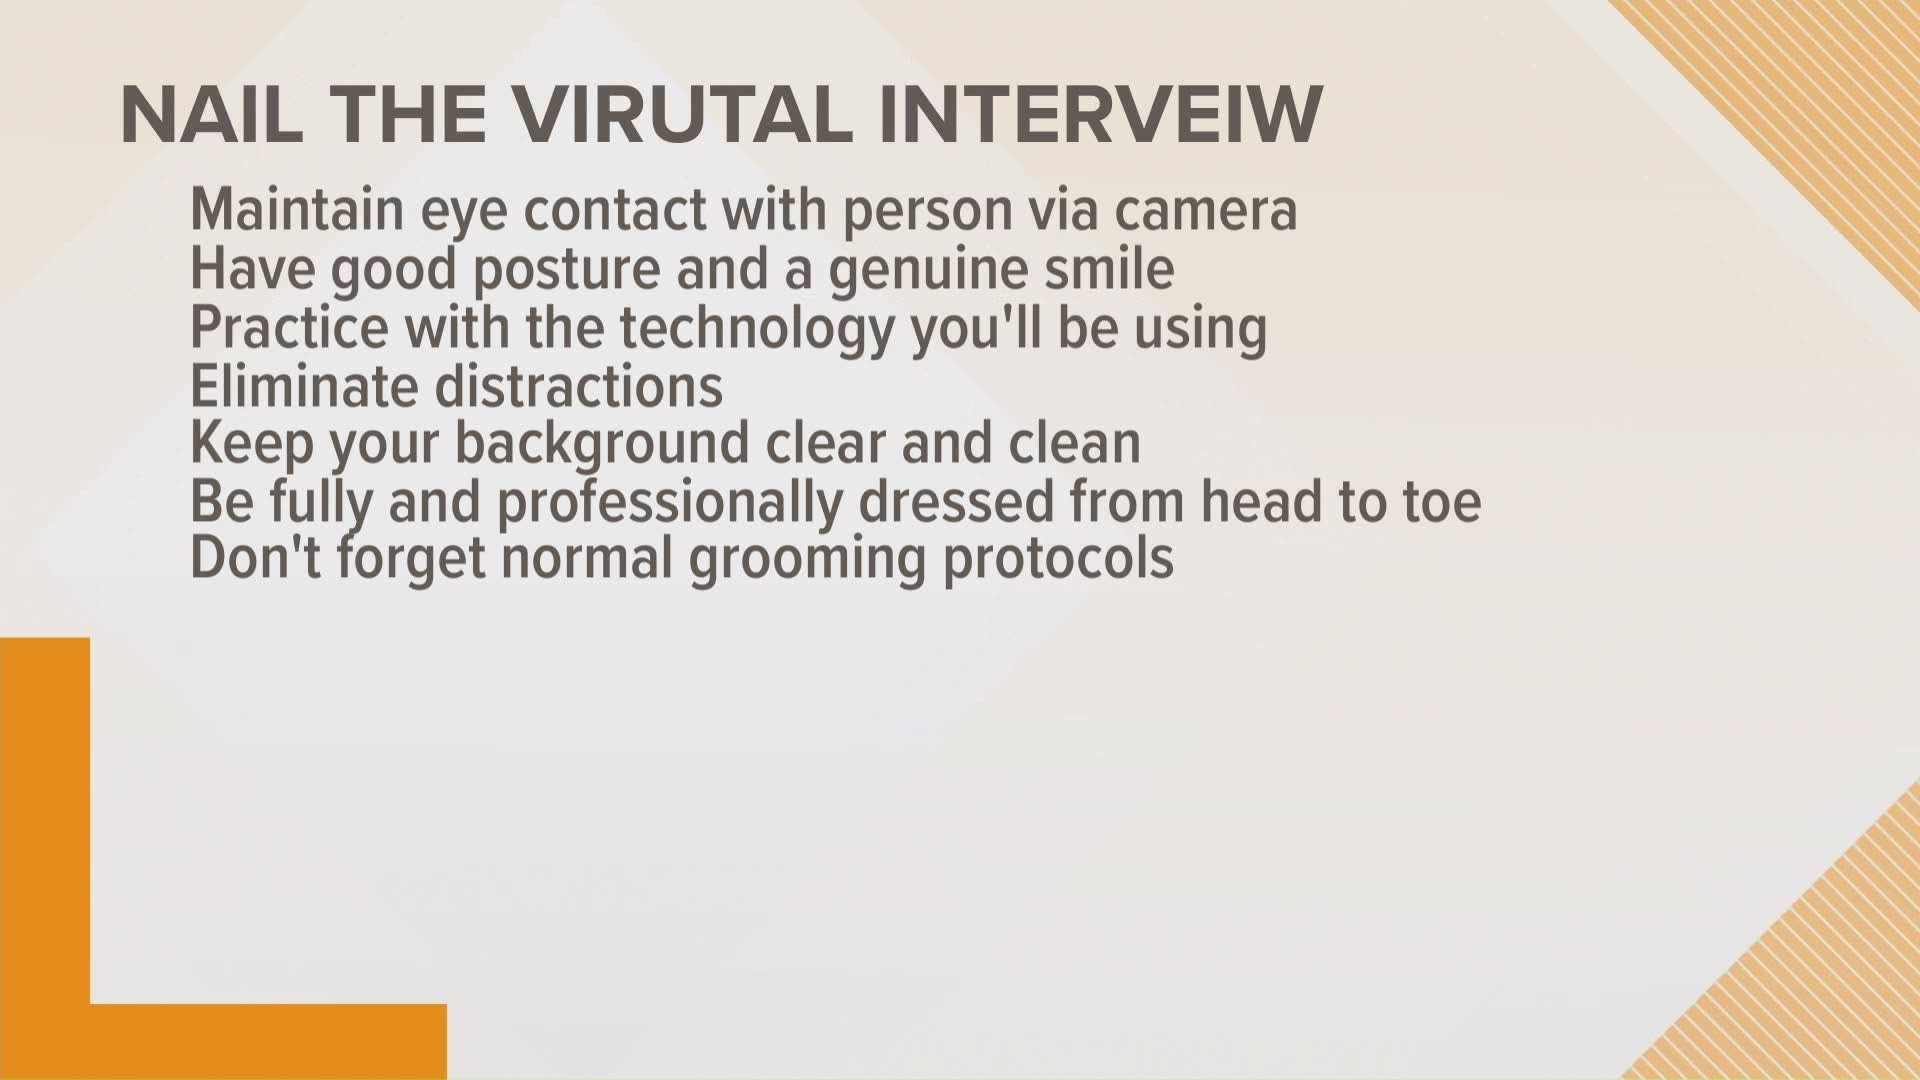 Tips on how to get the job while giving an interview virtually.